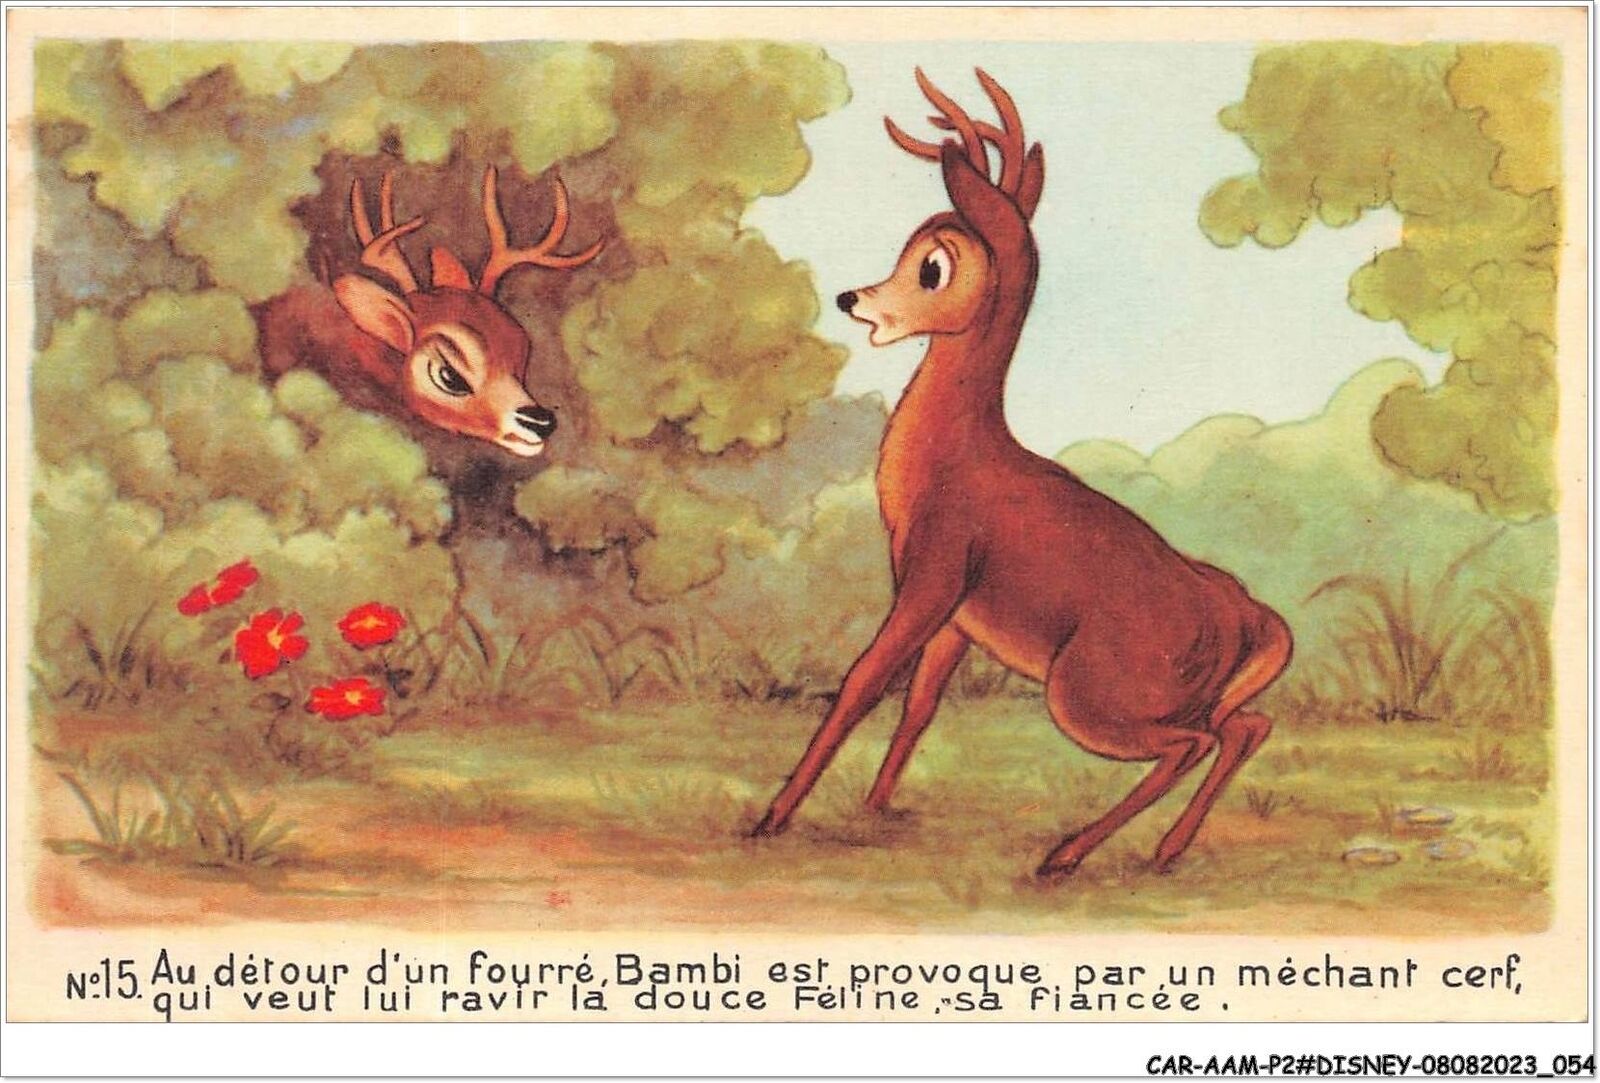 CAR-AAMP2-DISNEY-0129 - Bambi - Around a thicket Bambi is caused by